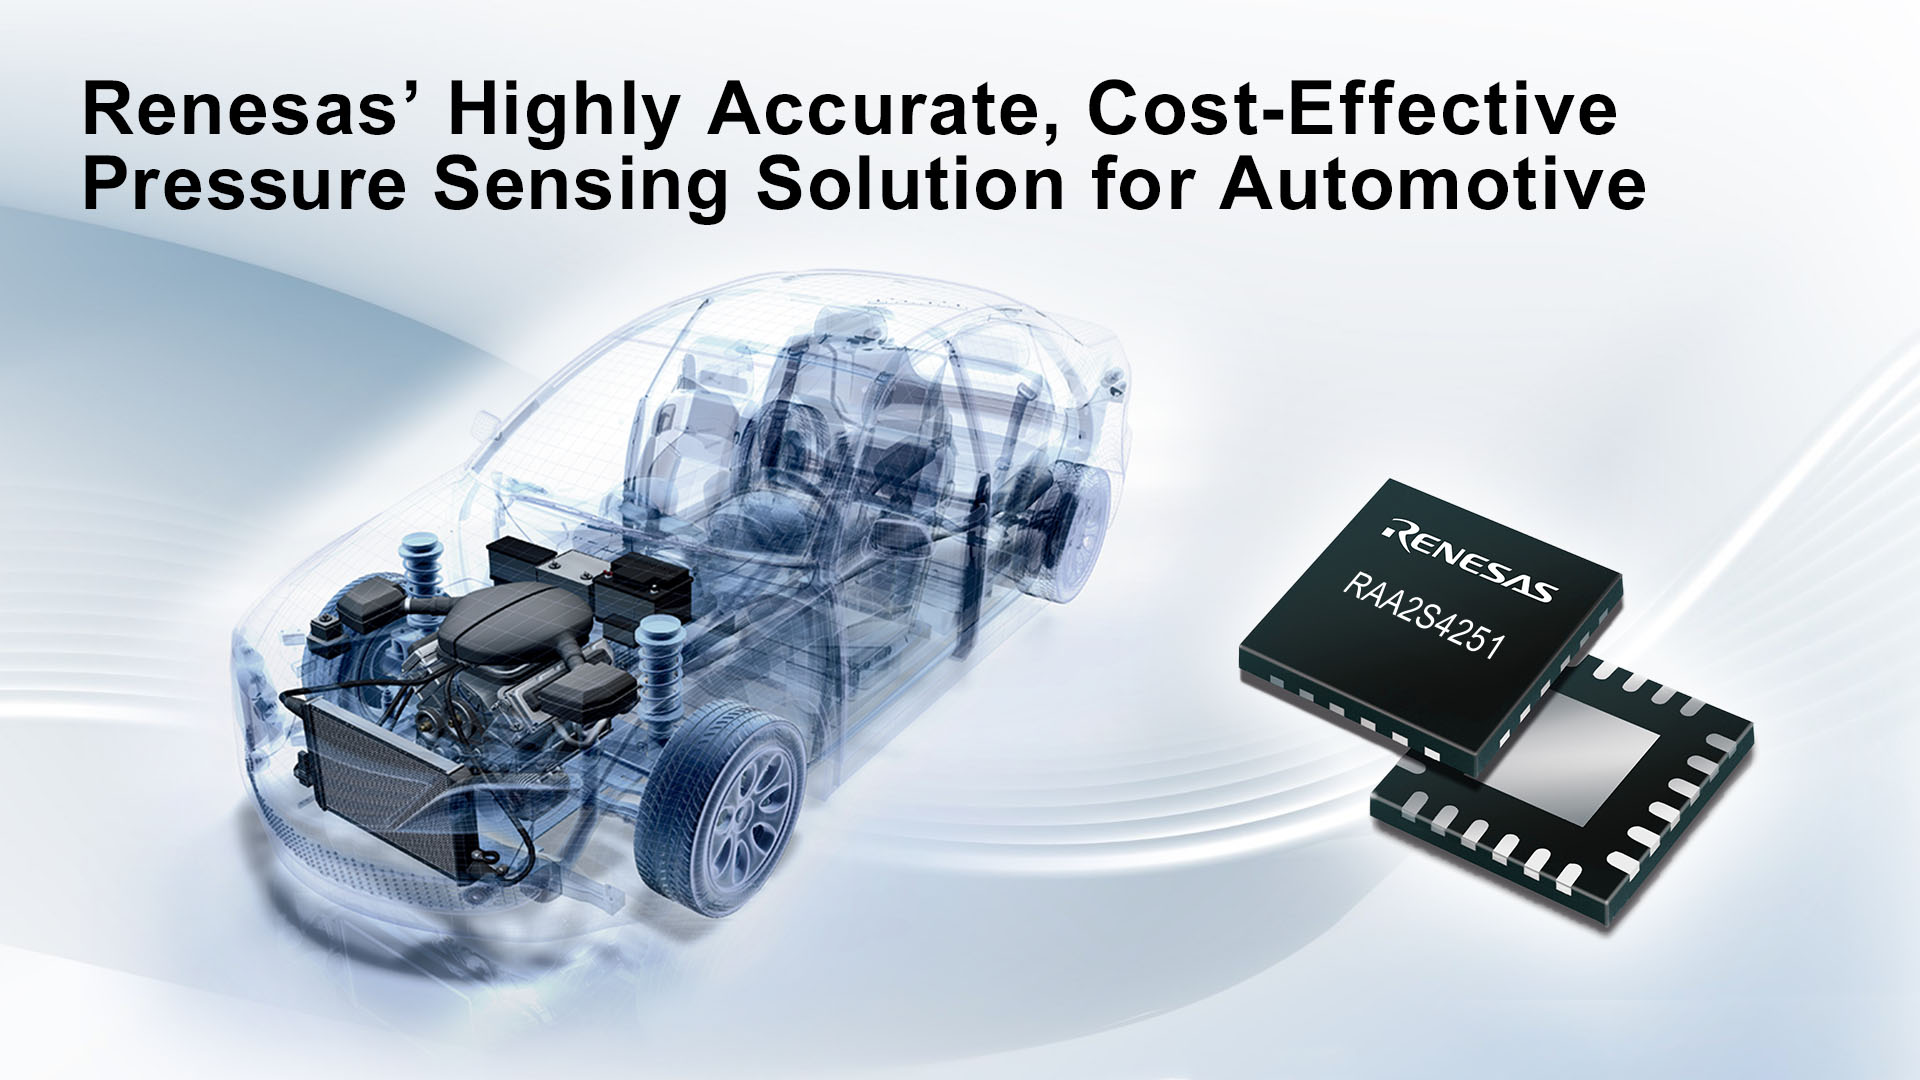 Highly Accurate Pressure Sensing for Automotive Applications